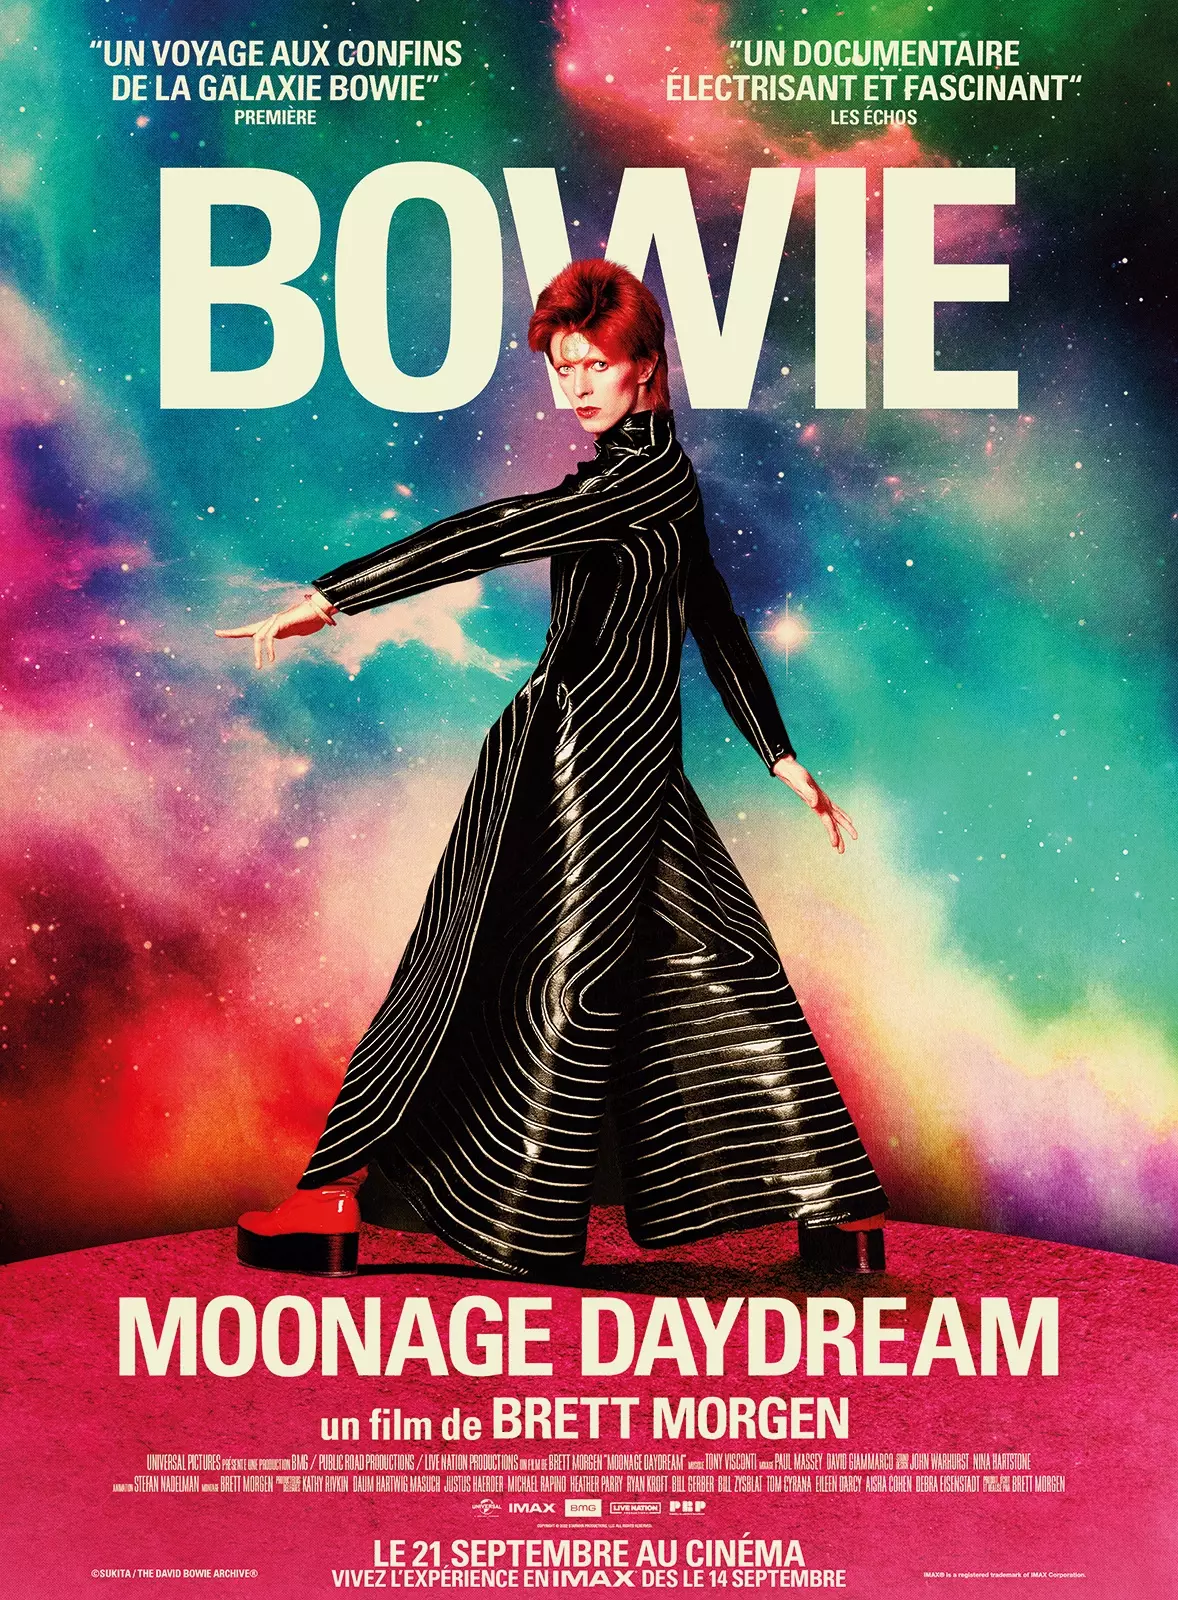 David Bowie : Moonage DayDream - Copyright Universal Pictures France